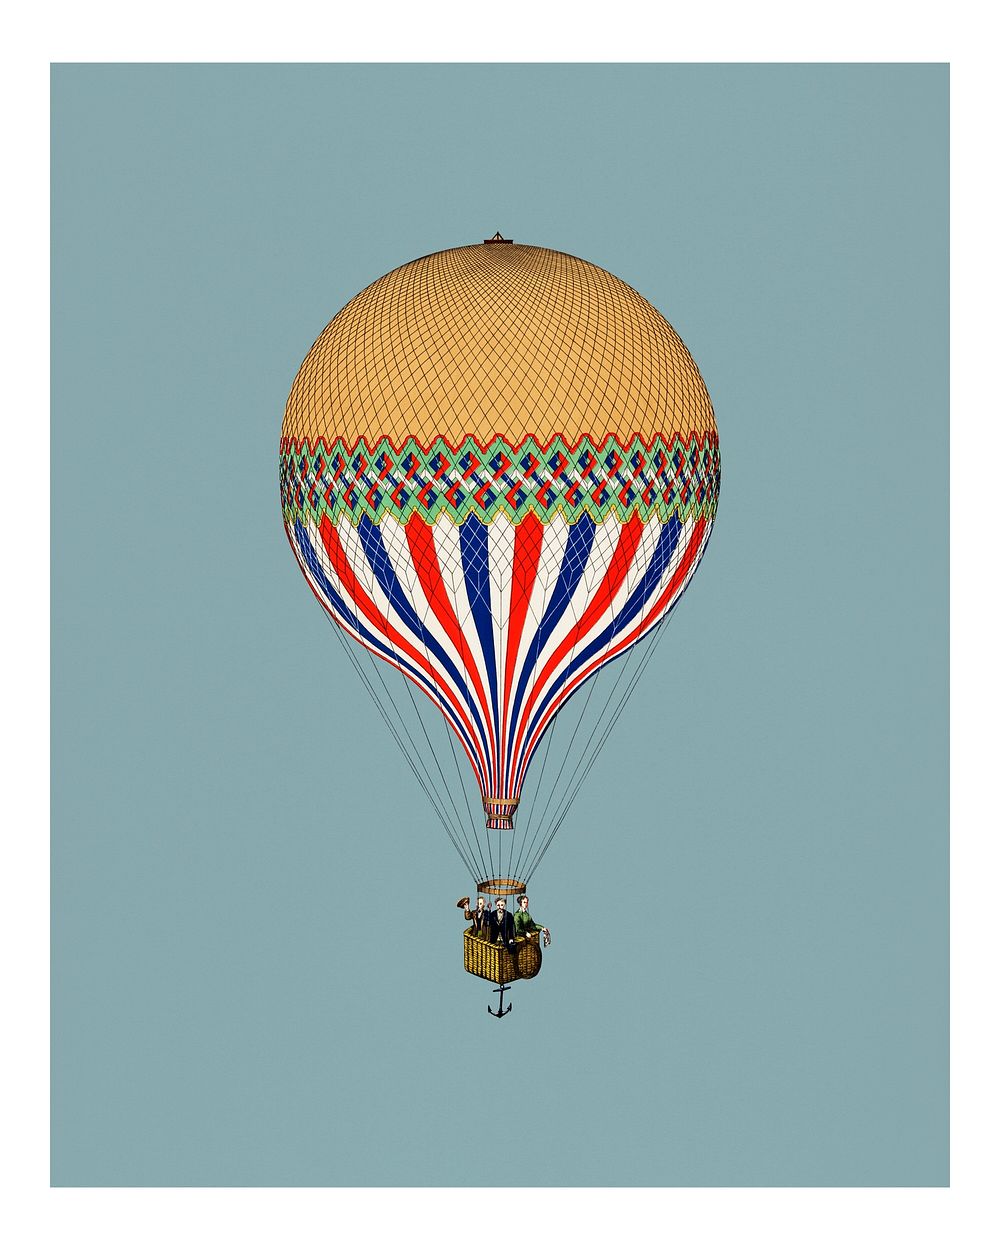 The Tricolor with a French flag themed balloon ascension vintage illustration wall art print and poster.